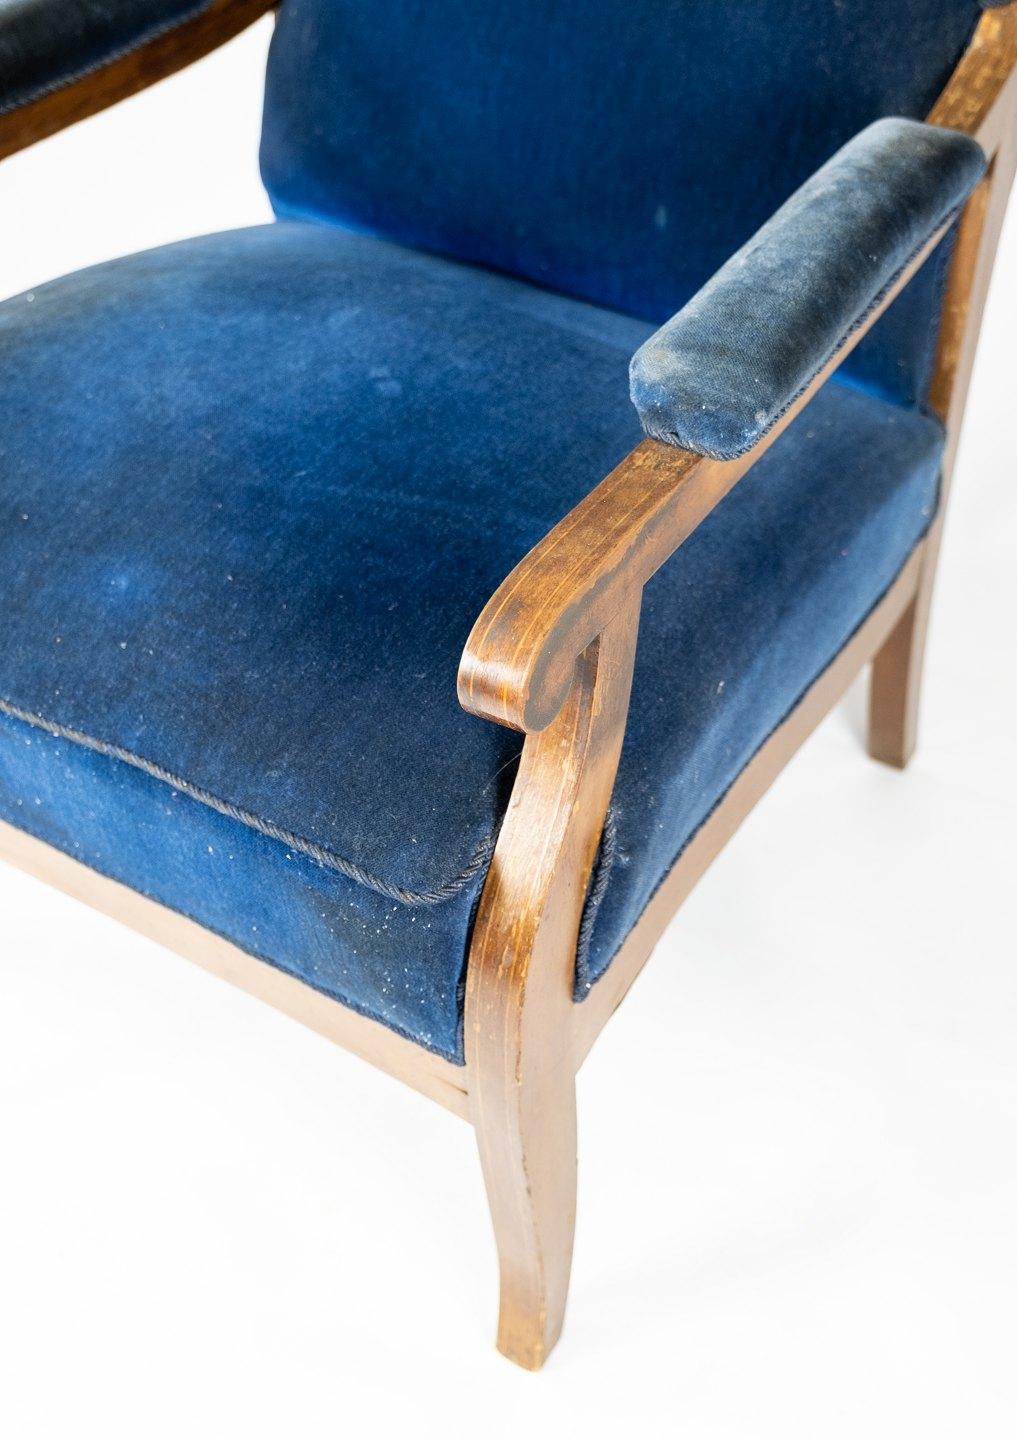 Armchair upholstered with blue velvet and mahogany designed by Fritz Henningsen. The chair is in great vintage condition.